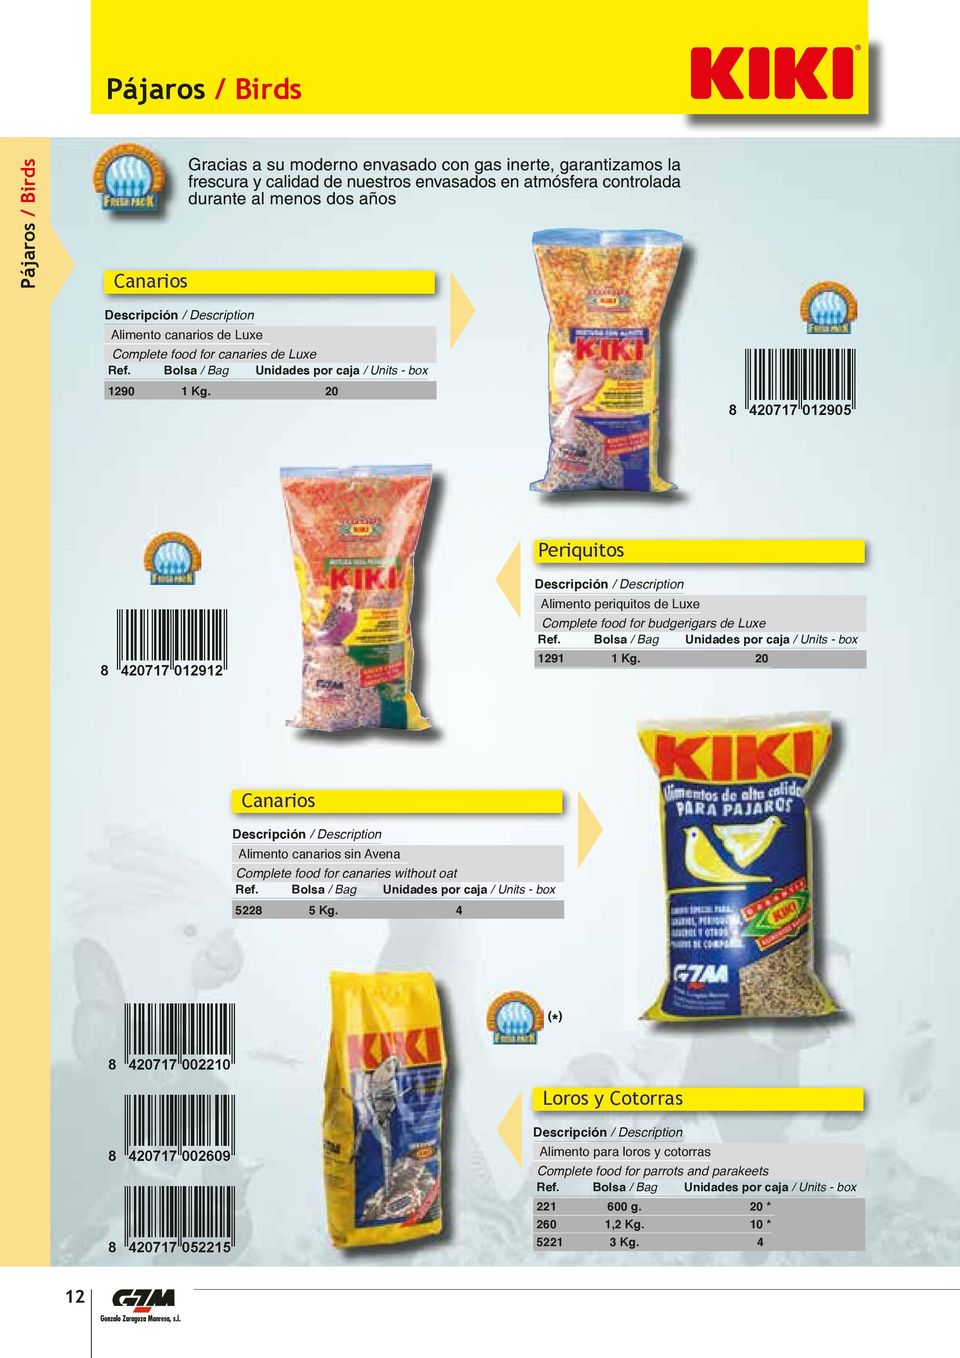 20 Canarios Alimento canarios sin Avena Complete food for canaries without oat 5228 5 Kg.